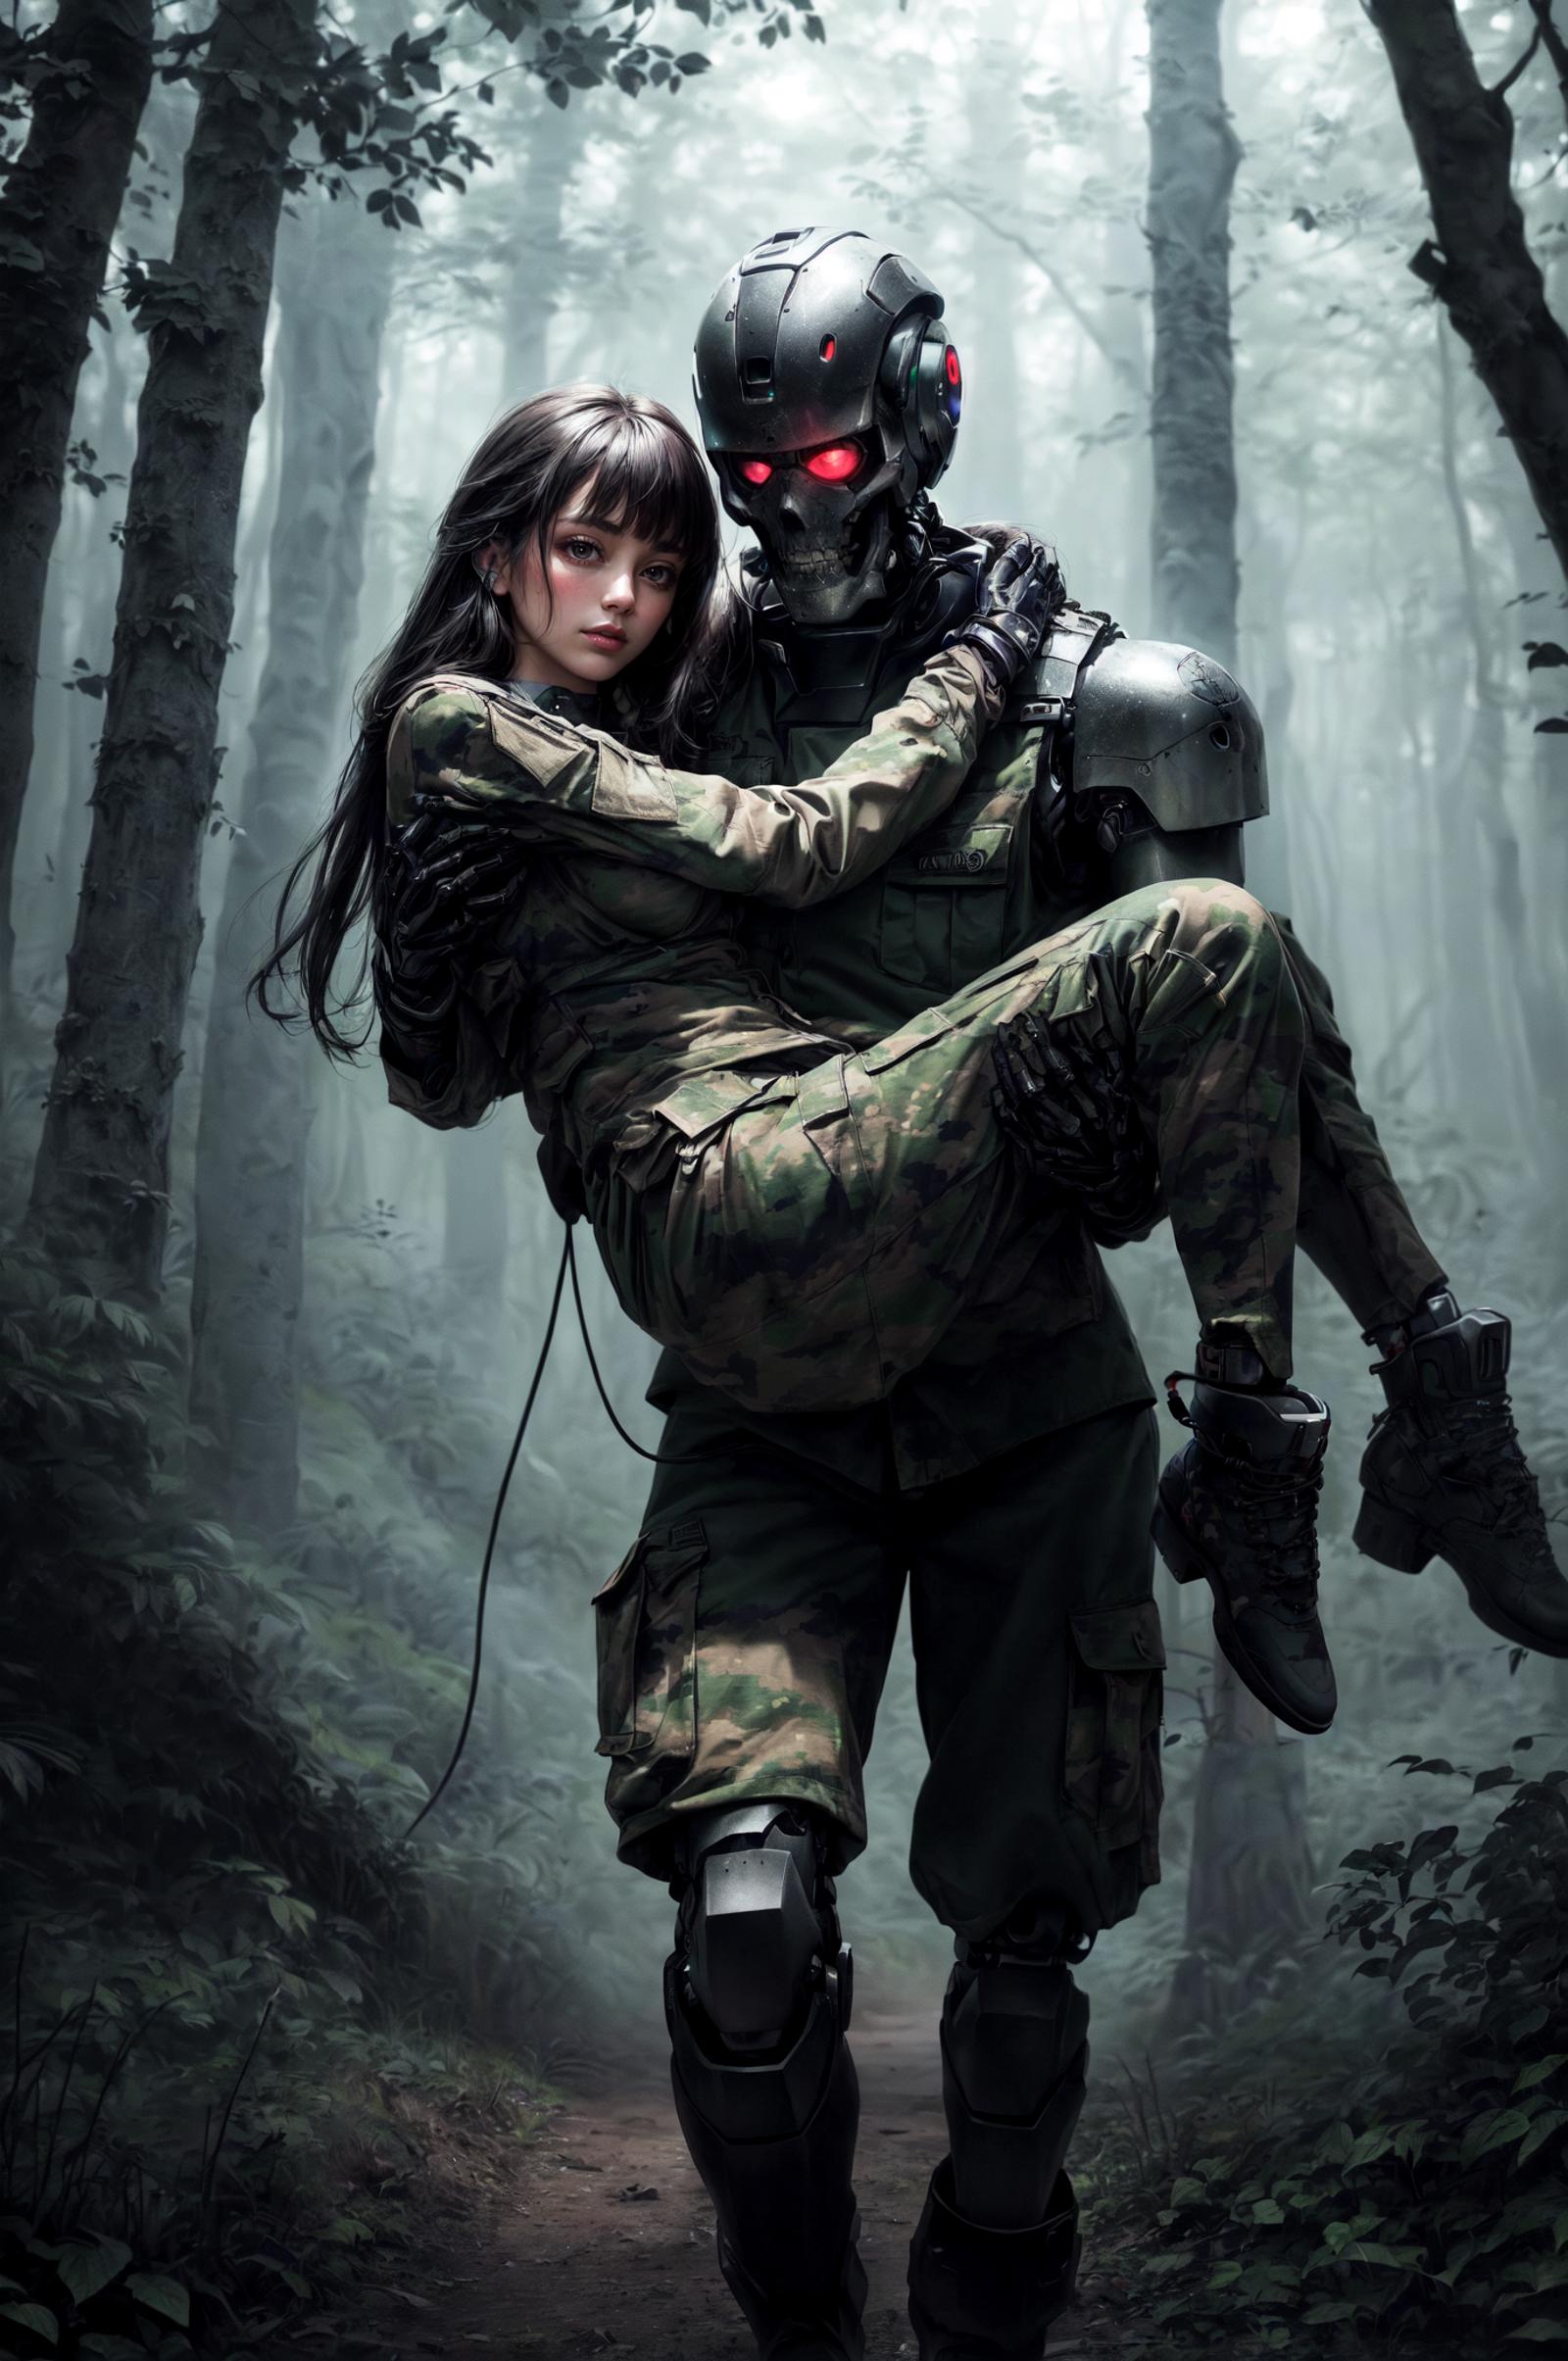 A man in a camouflage uniform holding a woman in a forest setting.